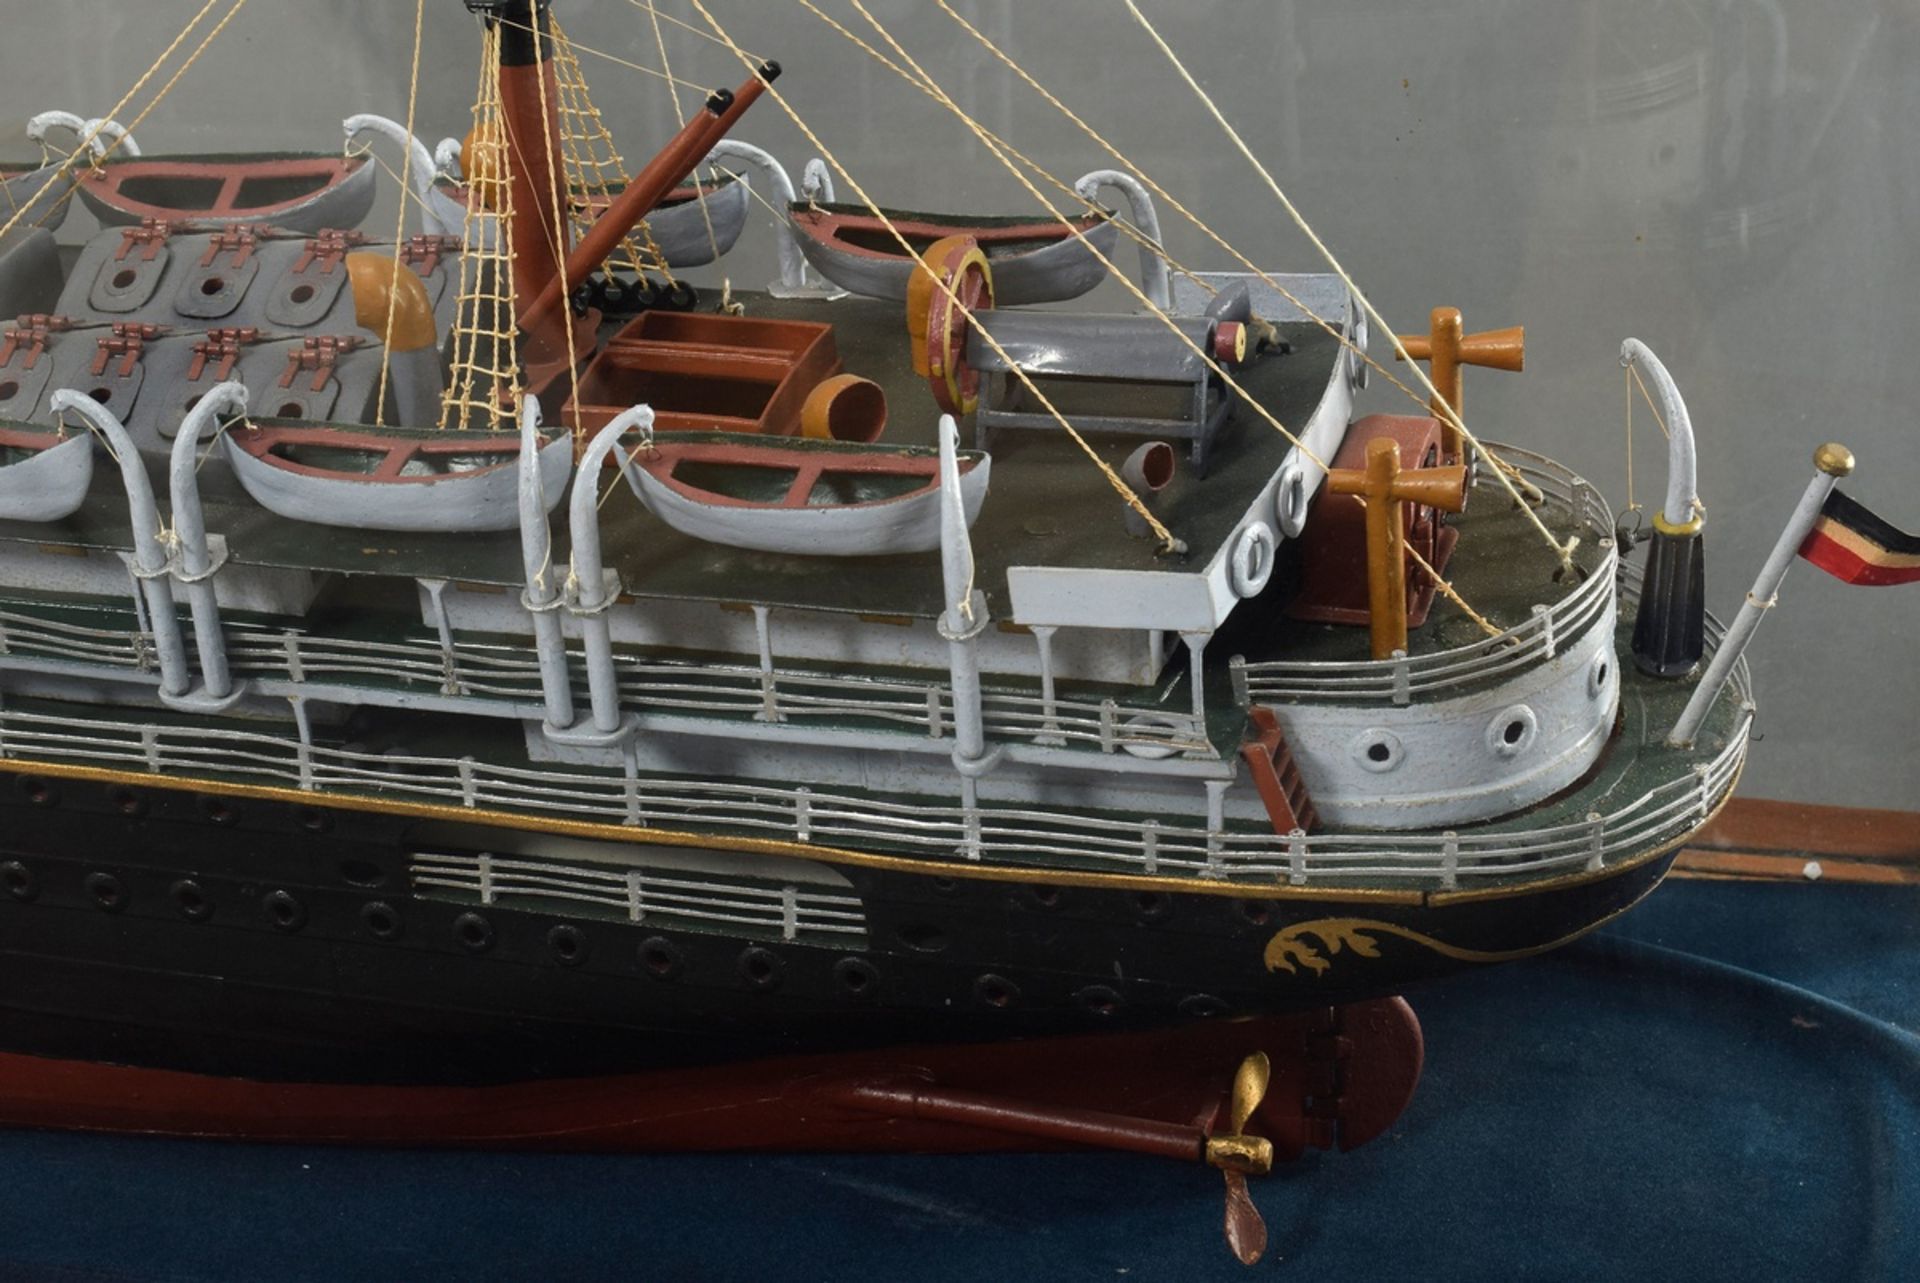 Model ship "Steamship of the Imperial Era" around 1900, paper/cardboard painted, manufact. Engineer - Image 5 of 7